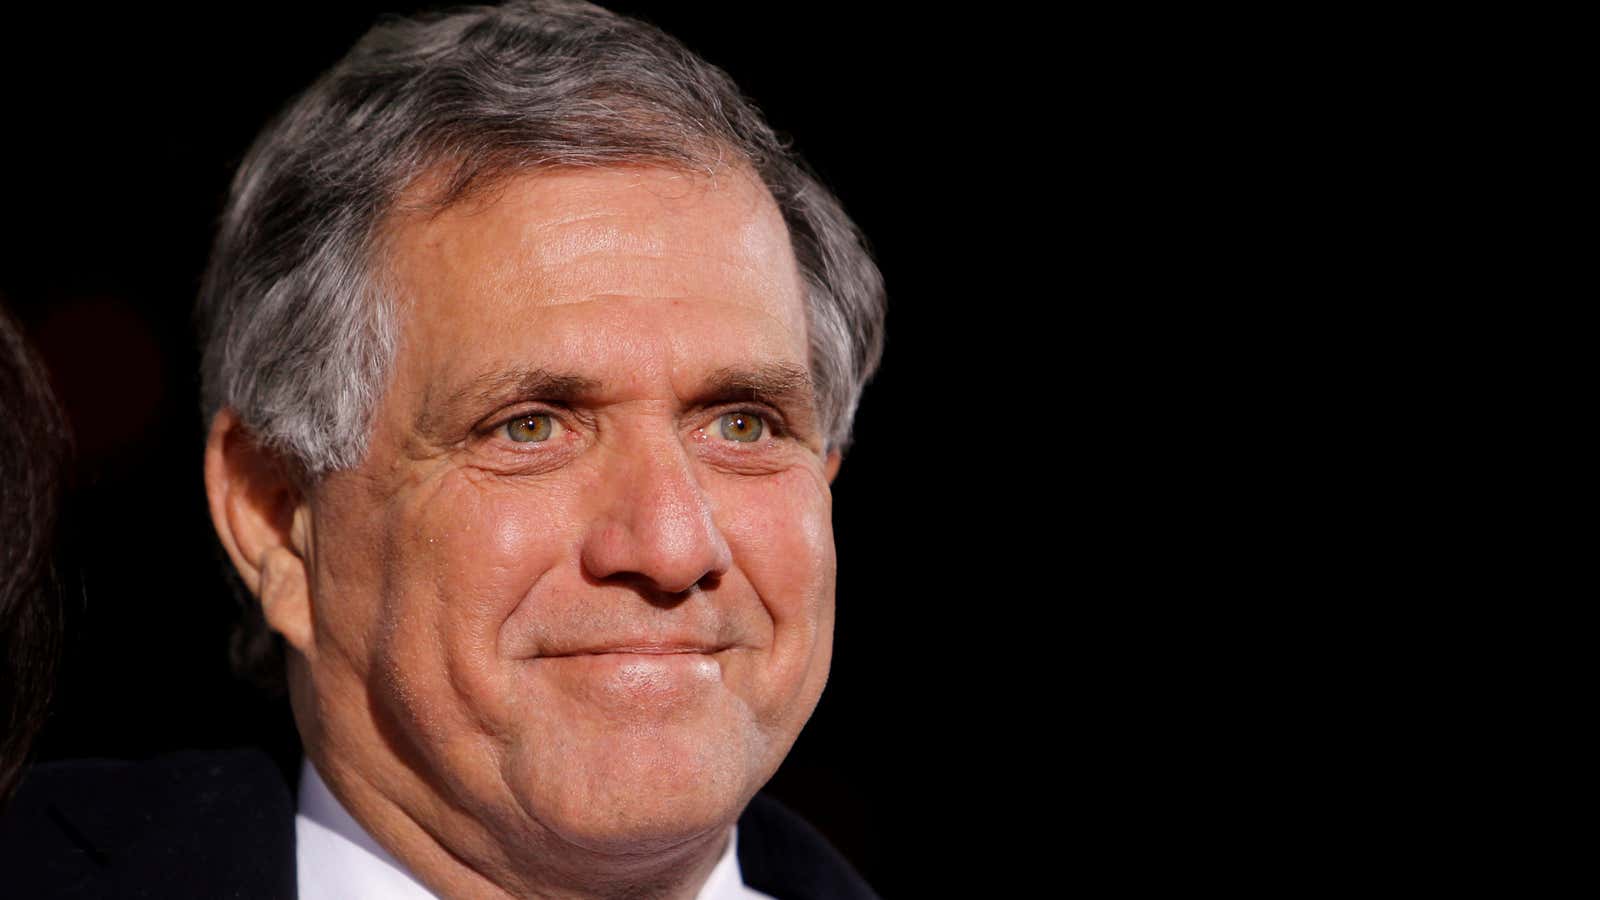 Les Moonves stepped down as head of CBS.